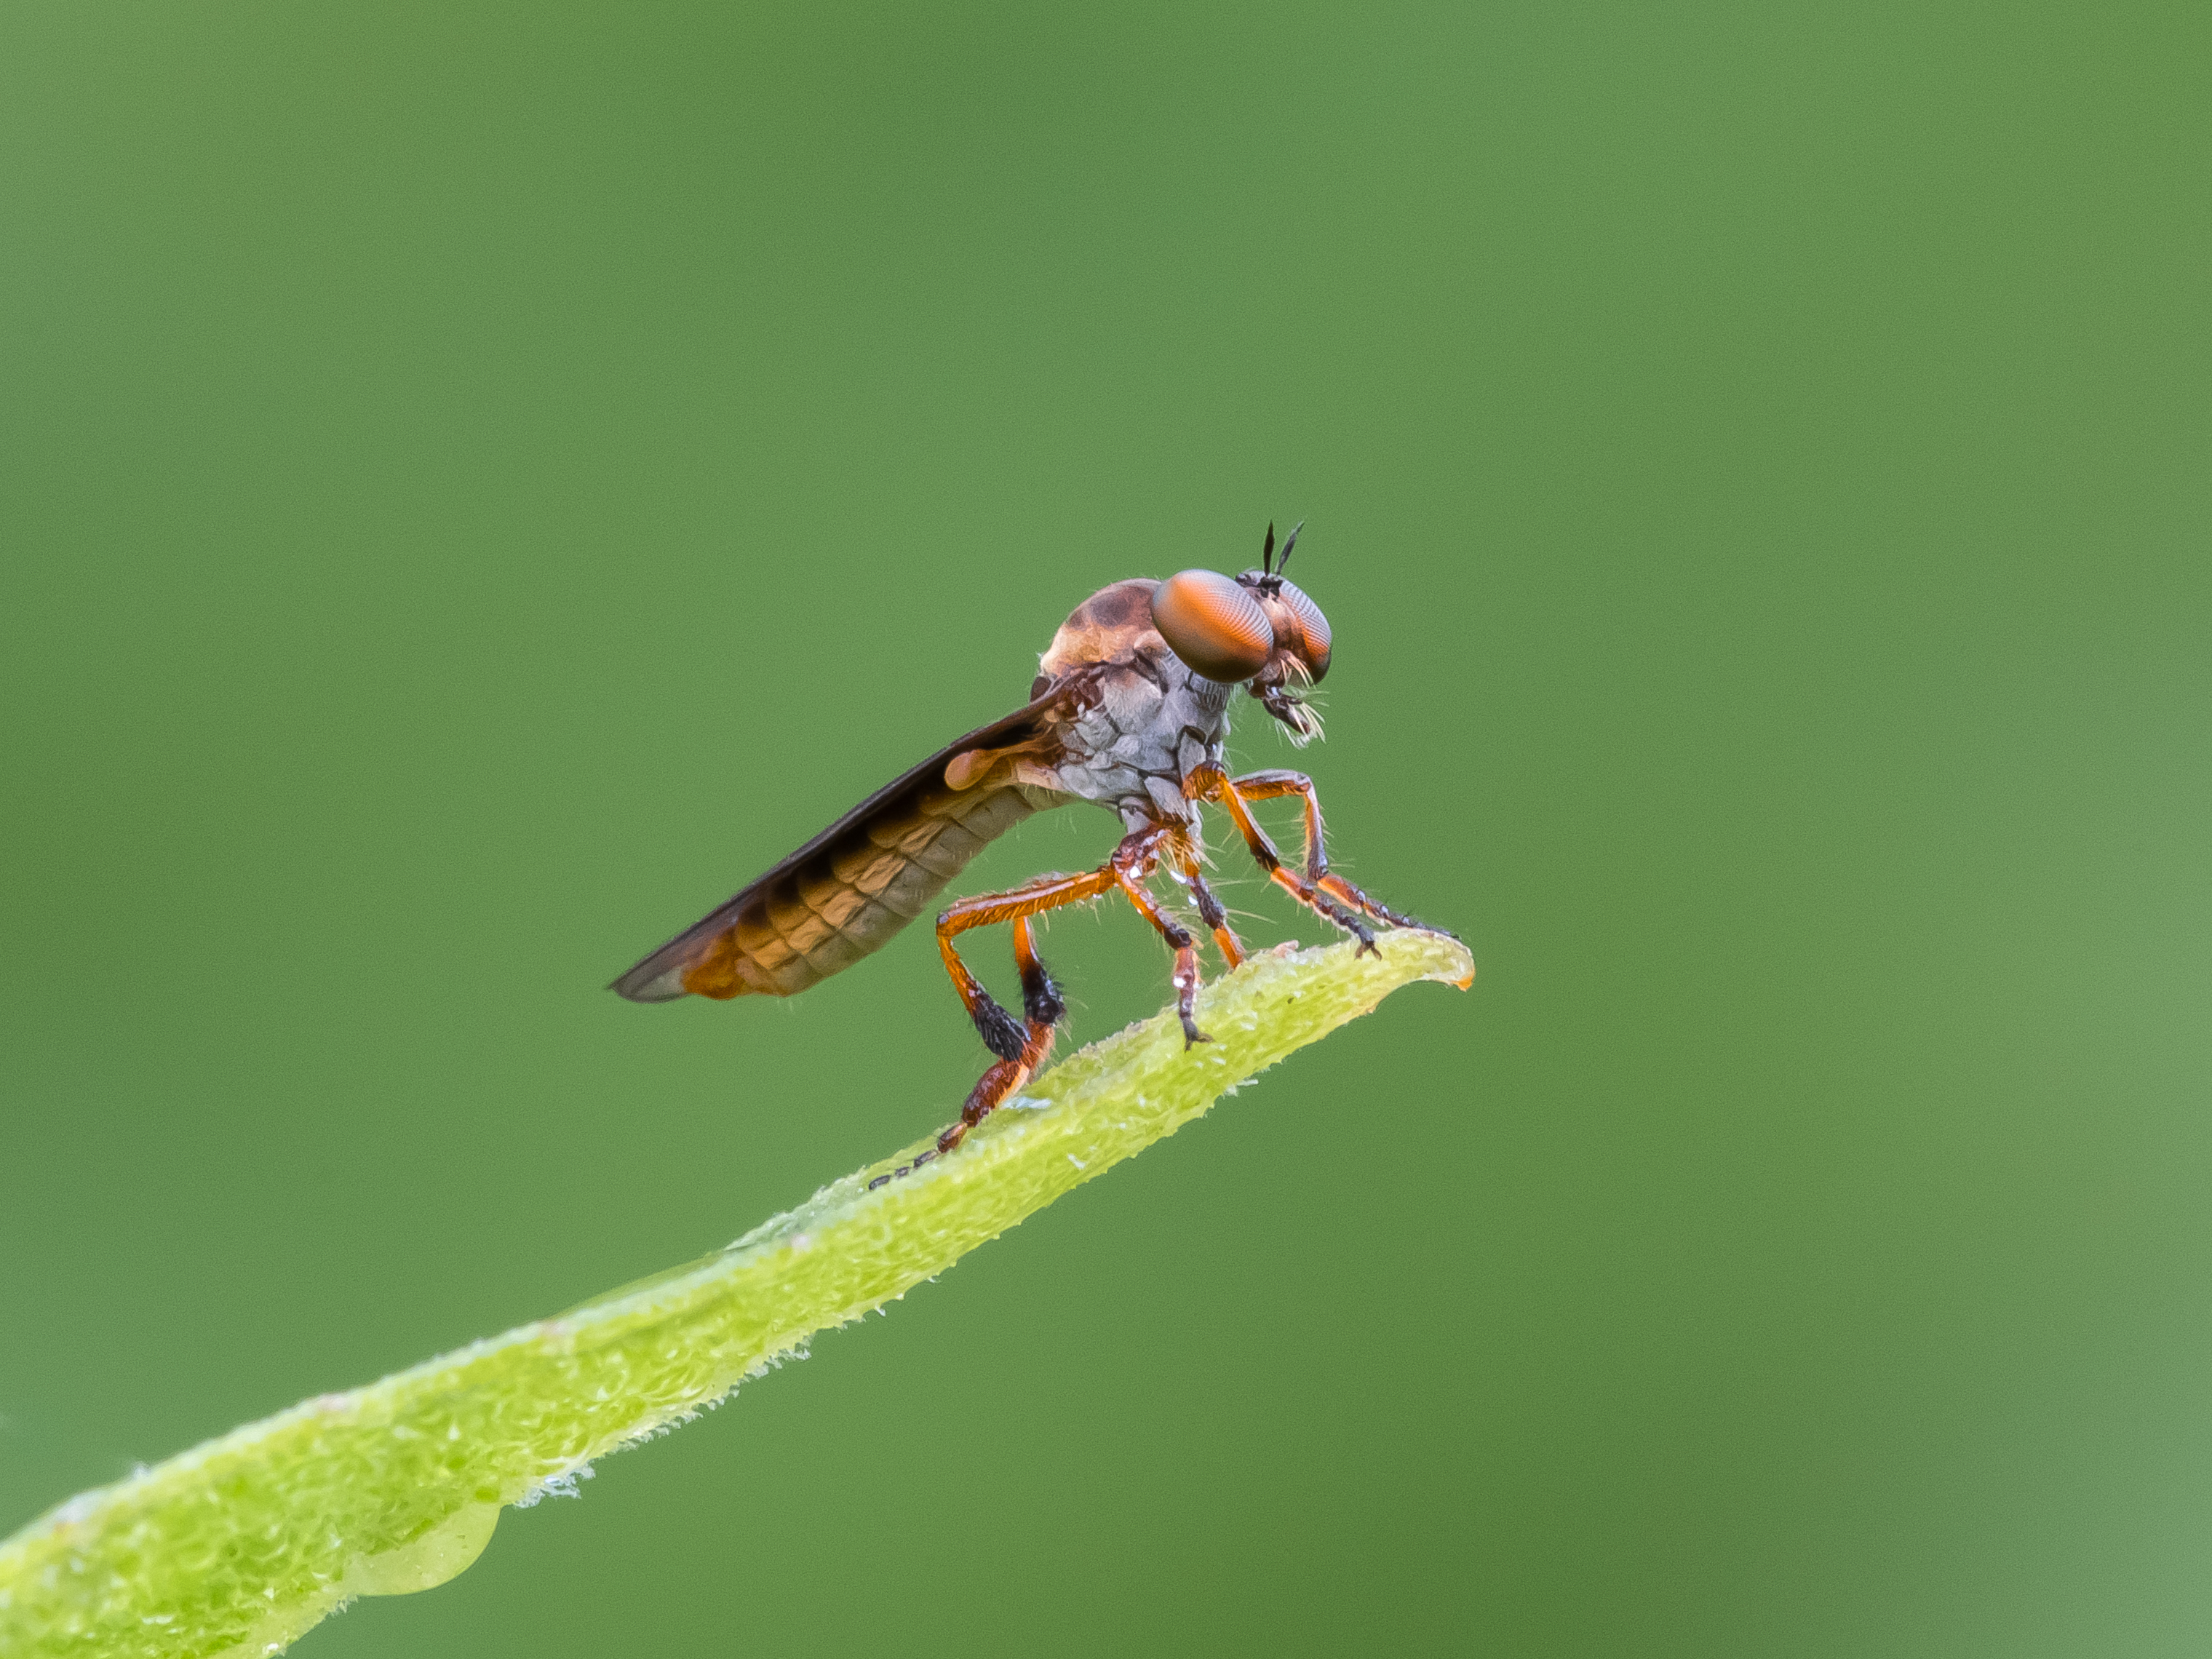 A robber fly sits on the end of a blade of grass